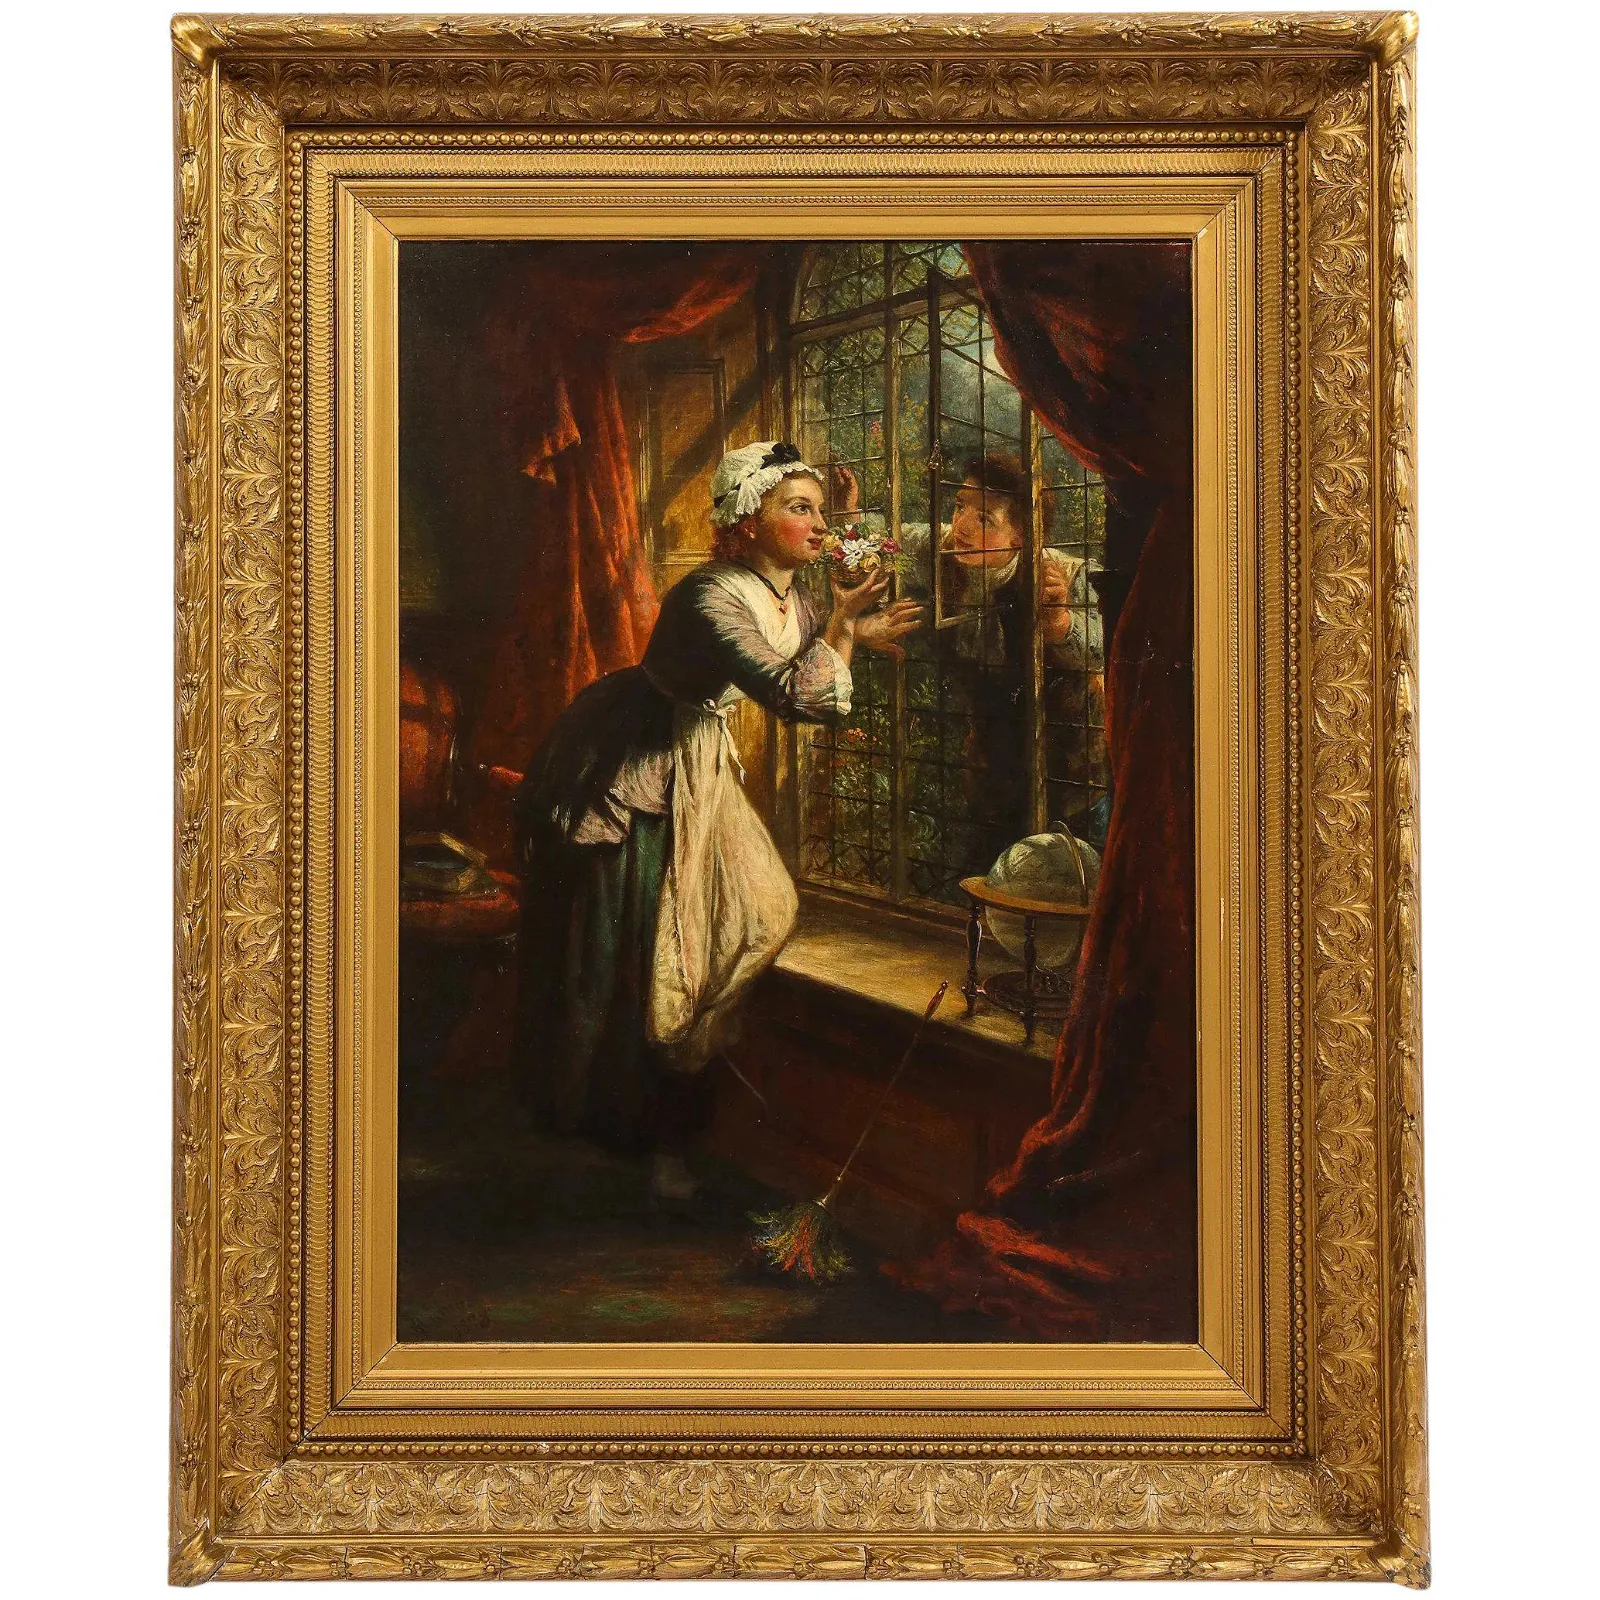 John Douglas Michie painting of a maid and her lover, est. $9,000-$11,000